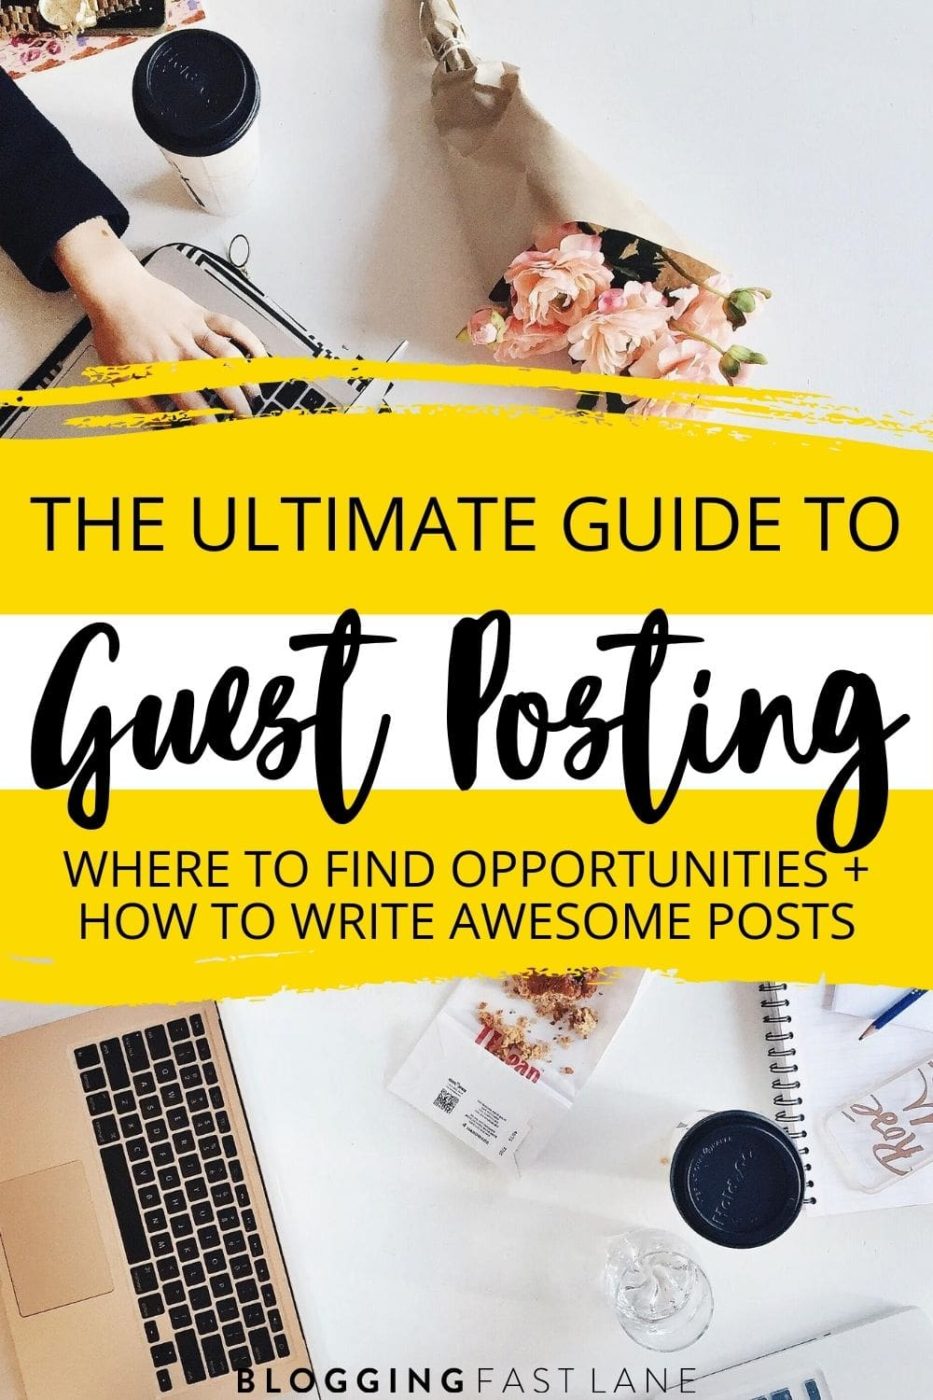 Guest Posting | Guest posts can do wonders for increasing your blog's traffic and authority online. Click here to read our complete guide to finding and writing guest posts!